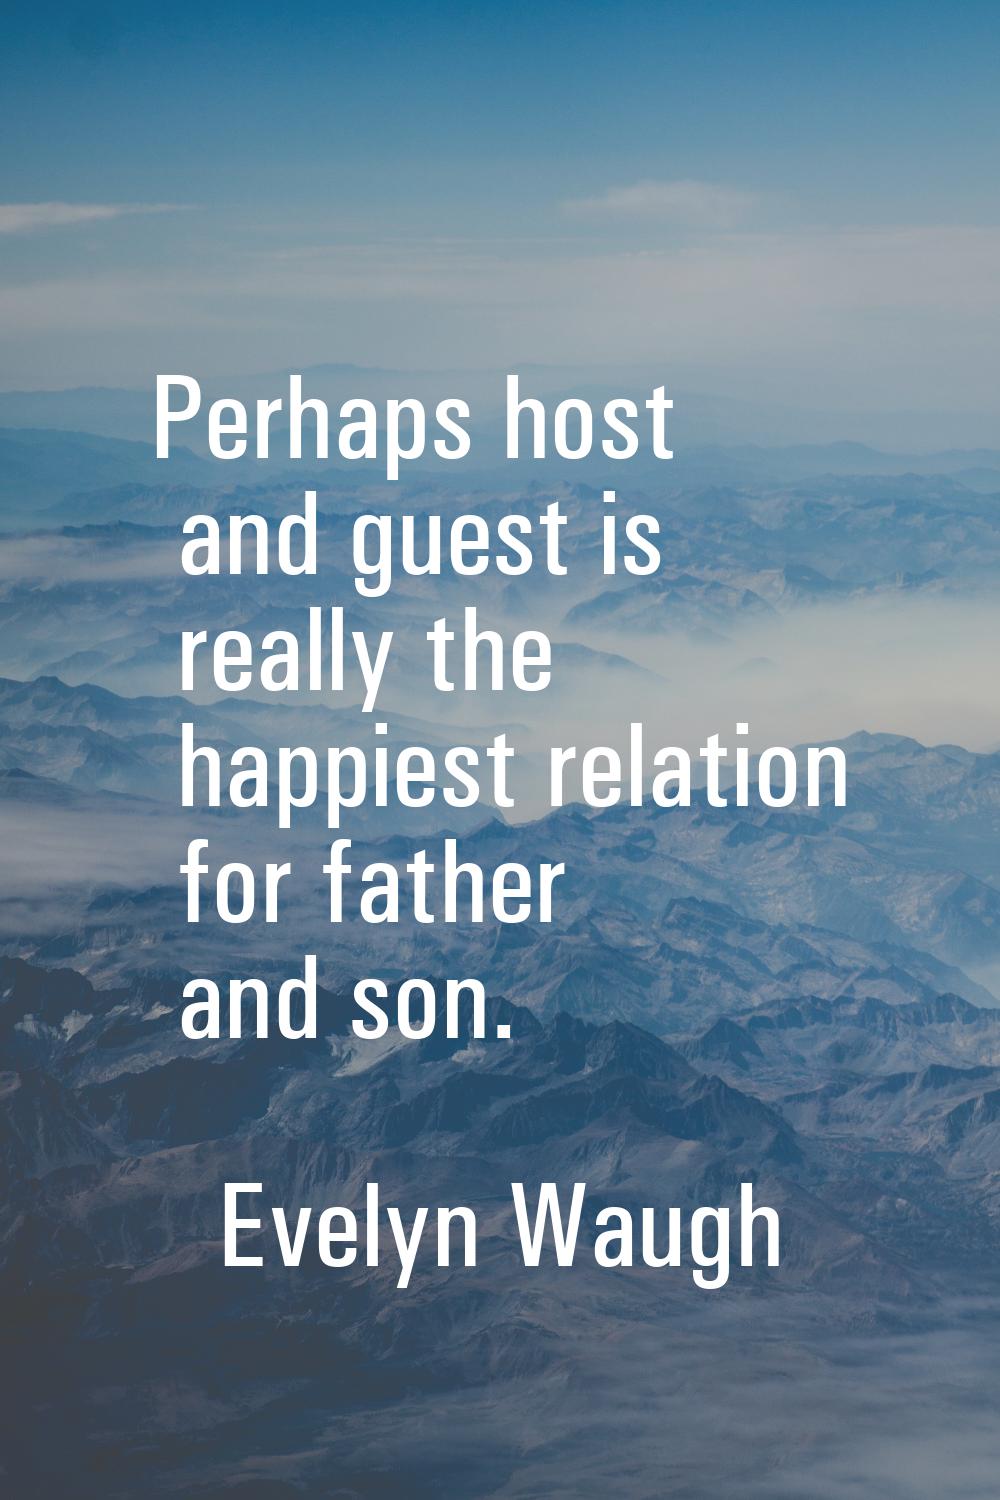 Perhaps host and guest is really the happiest relation for father and son.